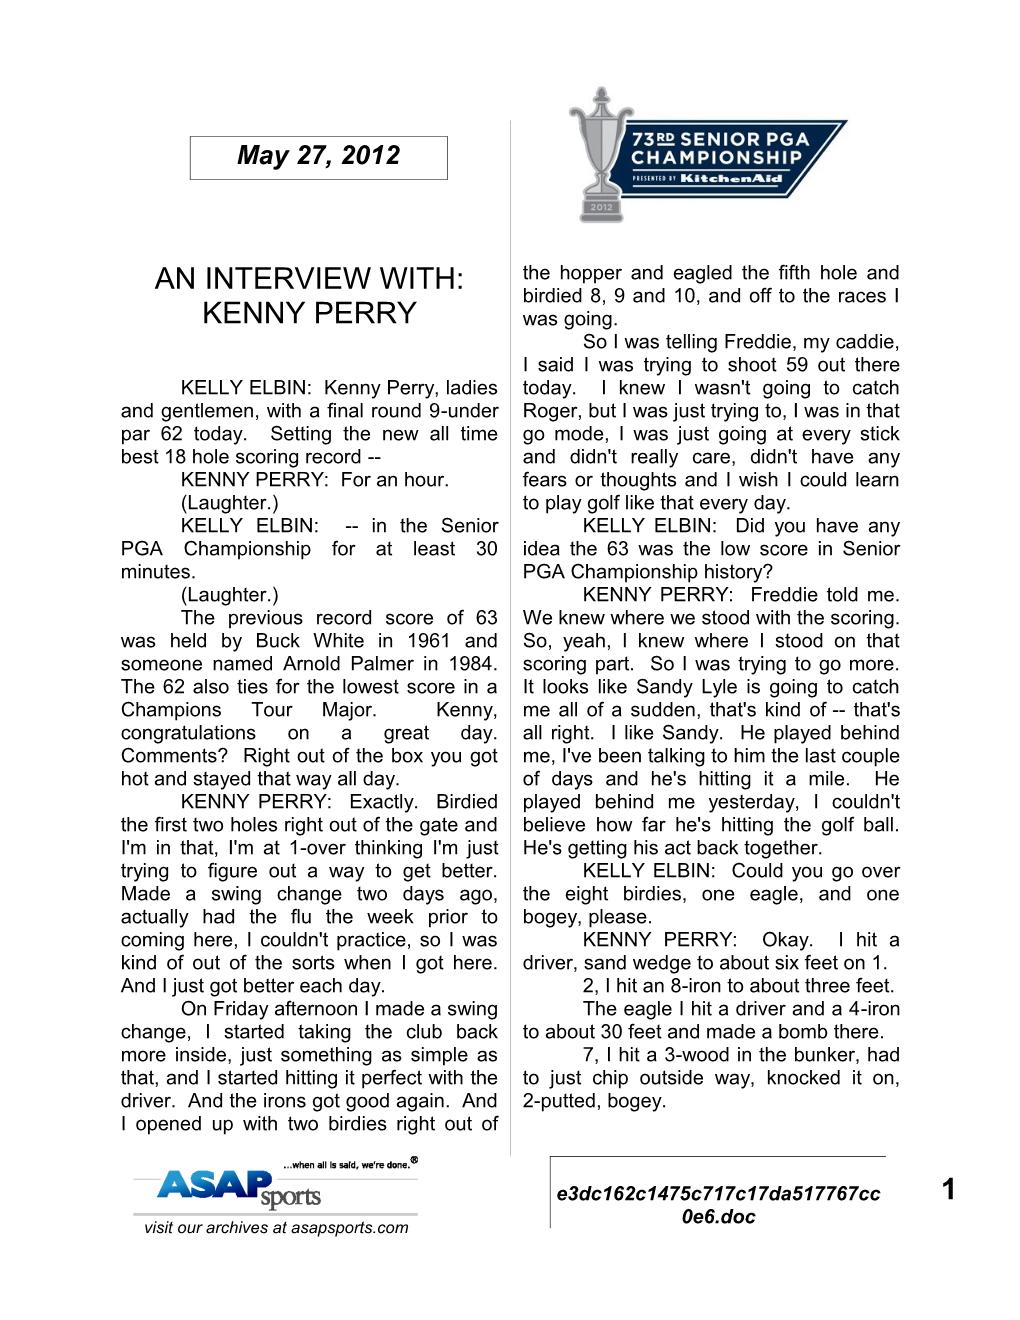 KENNY PERRY: for an Hour